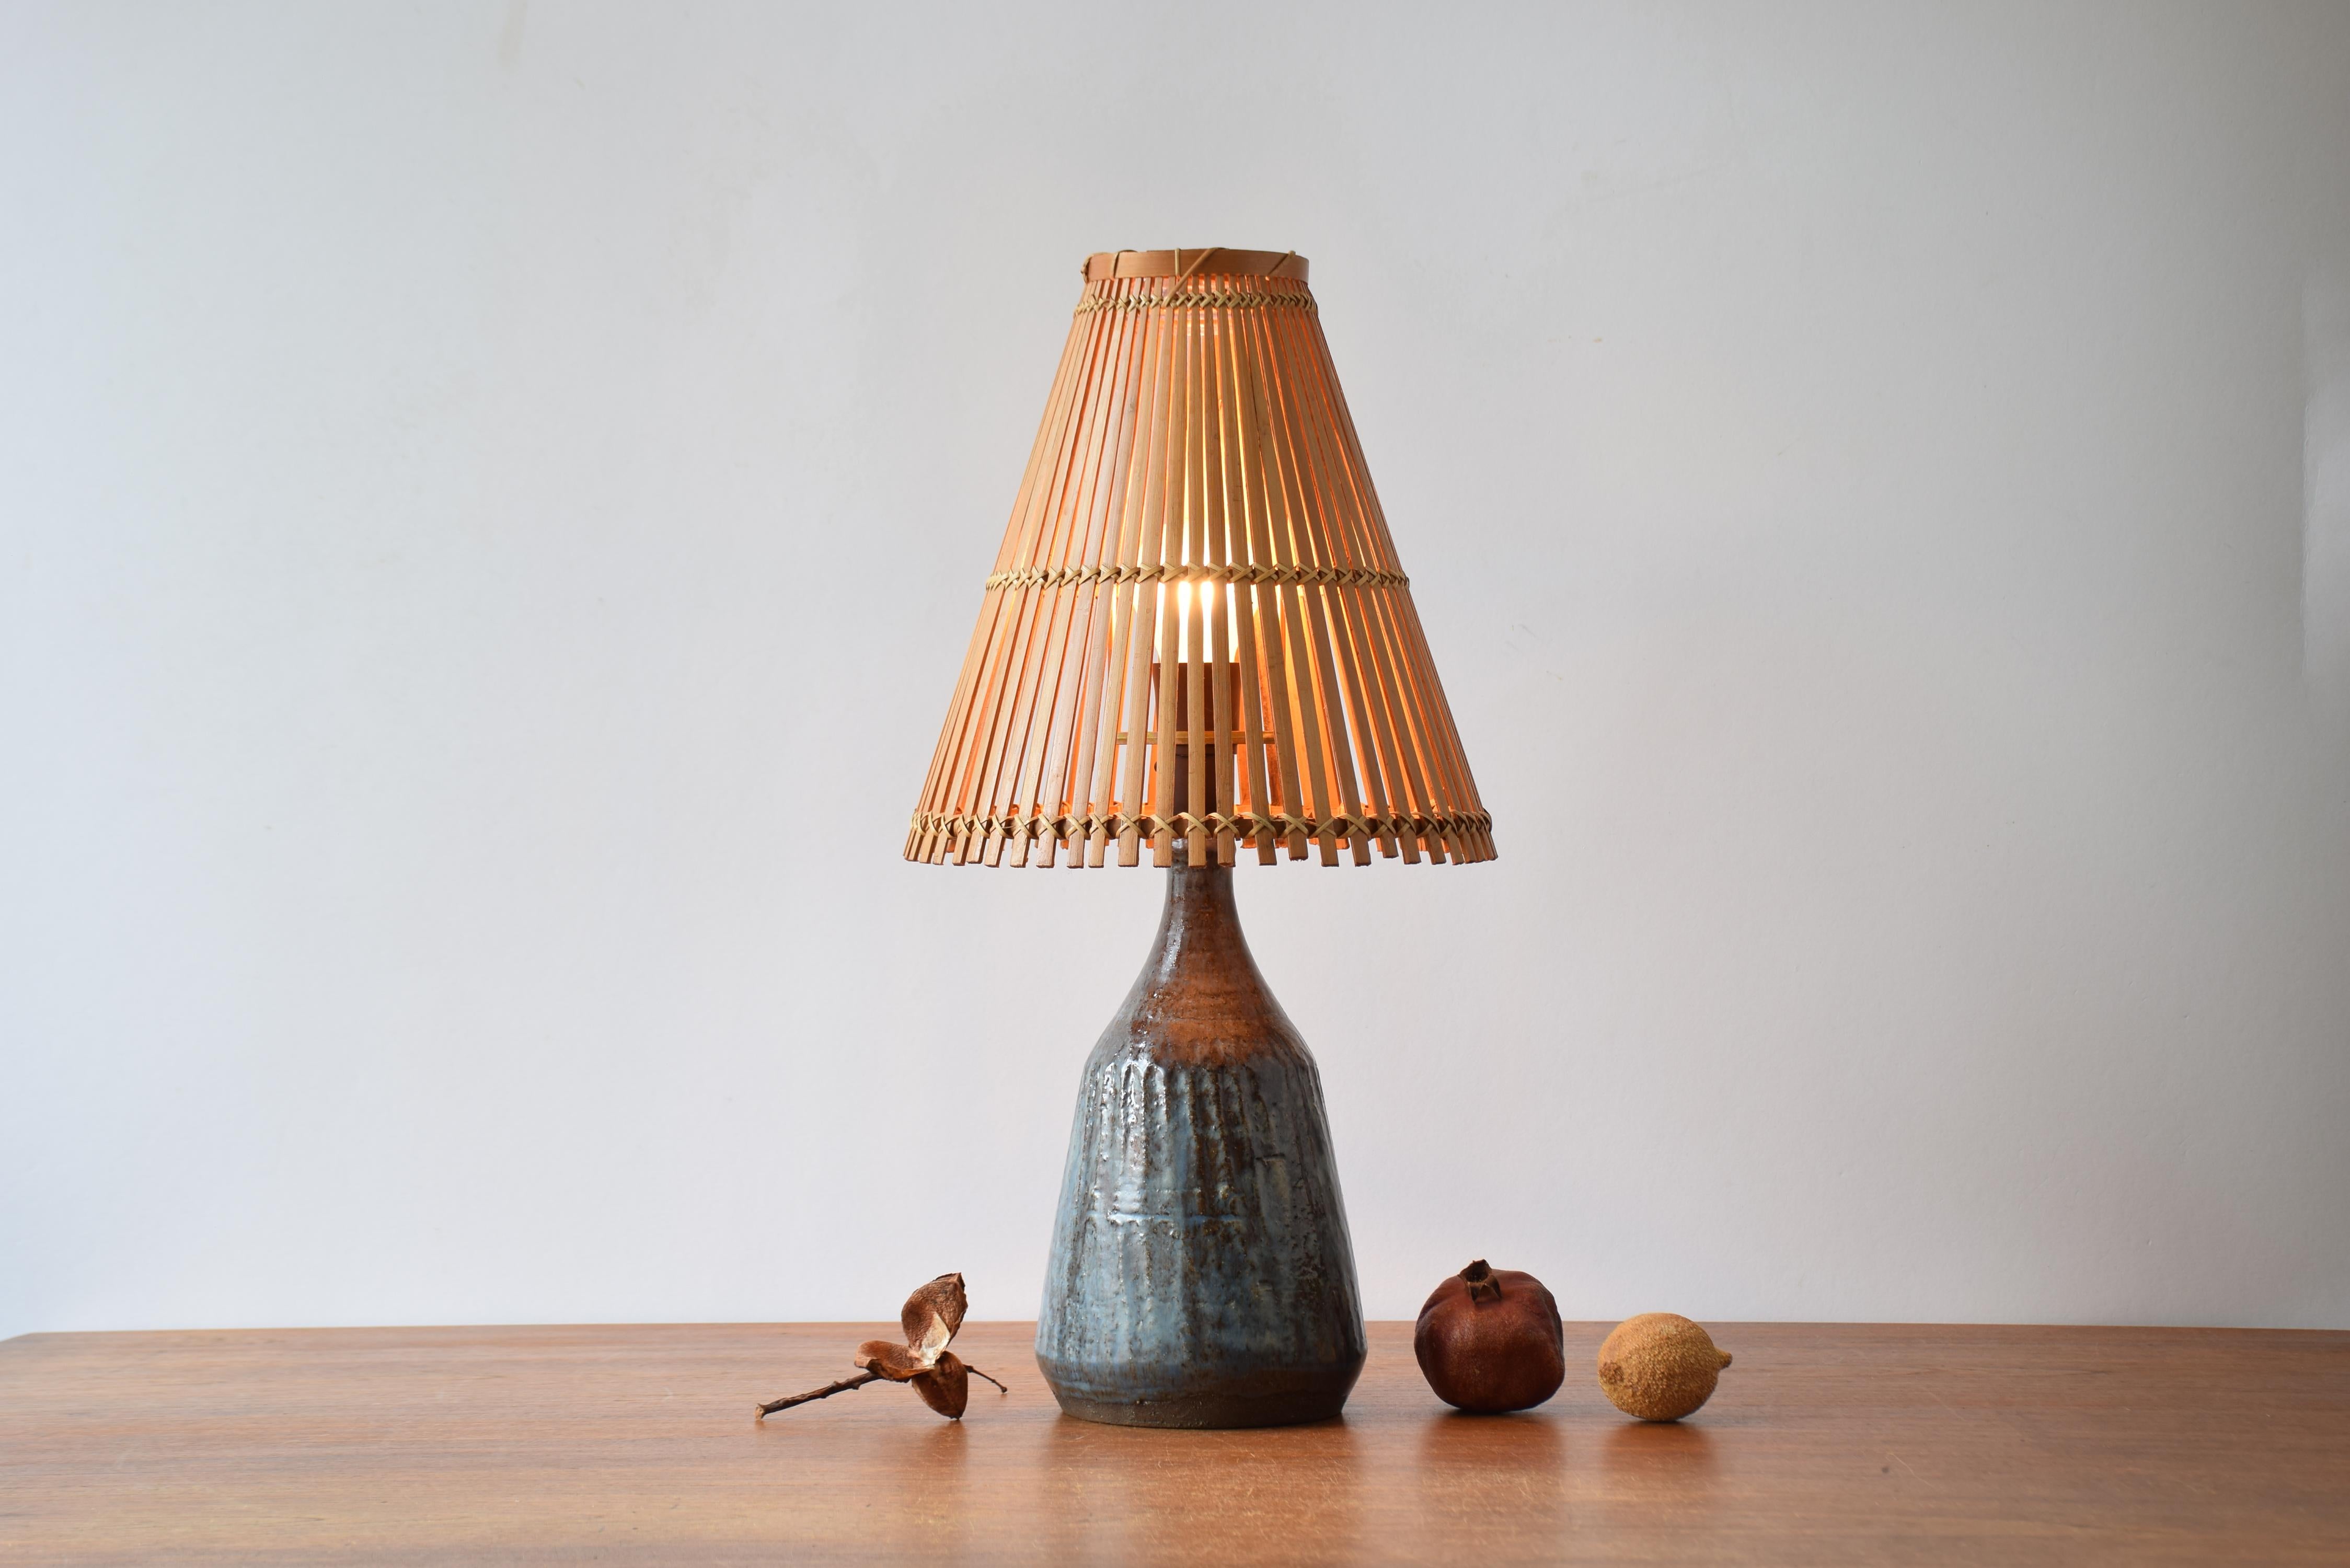 Mid-century ceramic table lamp from a Danish studio workshop. Made ca. 1950s to 1960s. The lamp includes a vintage bamboo lamp shade.

The lamp has a blue and brown glaze.

The lamp isn't signed and the designer is unknown. The style is reminiscent